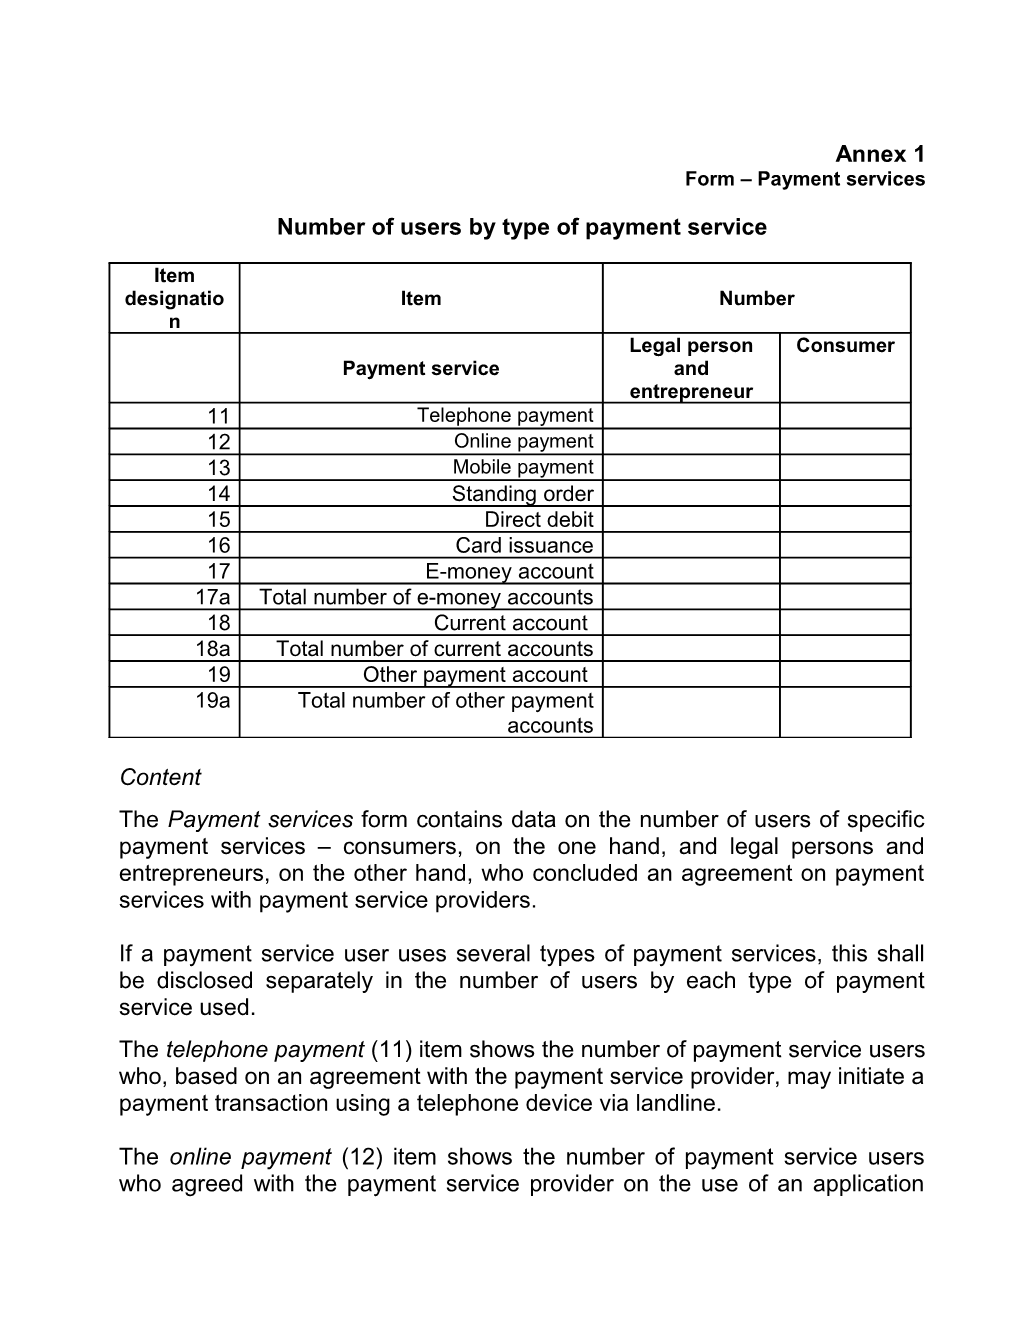 Number of Users by Type of Payment Service